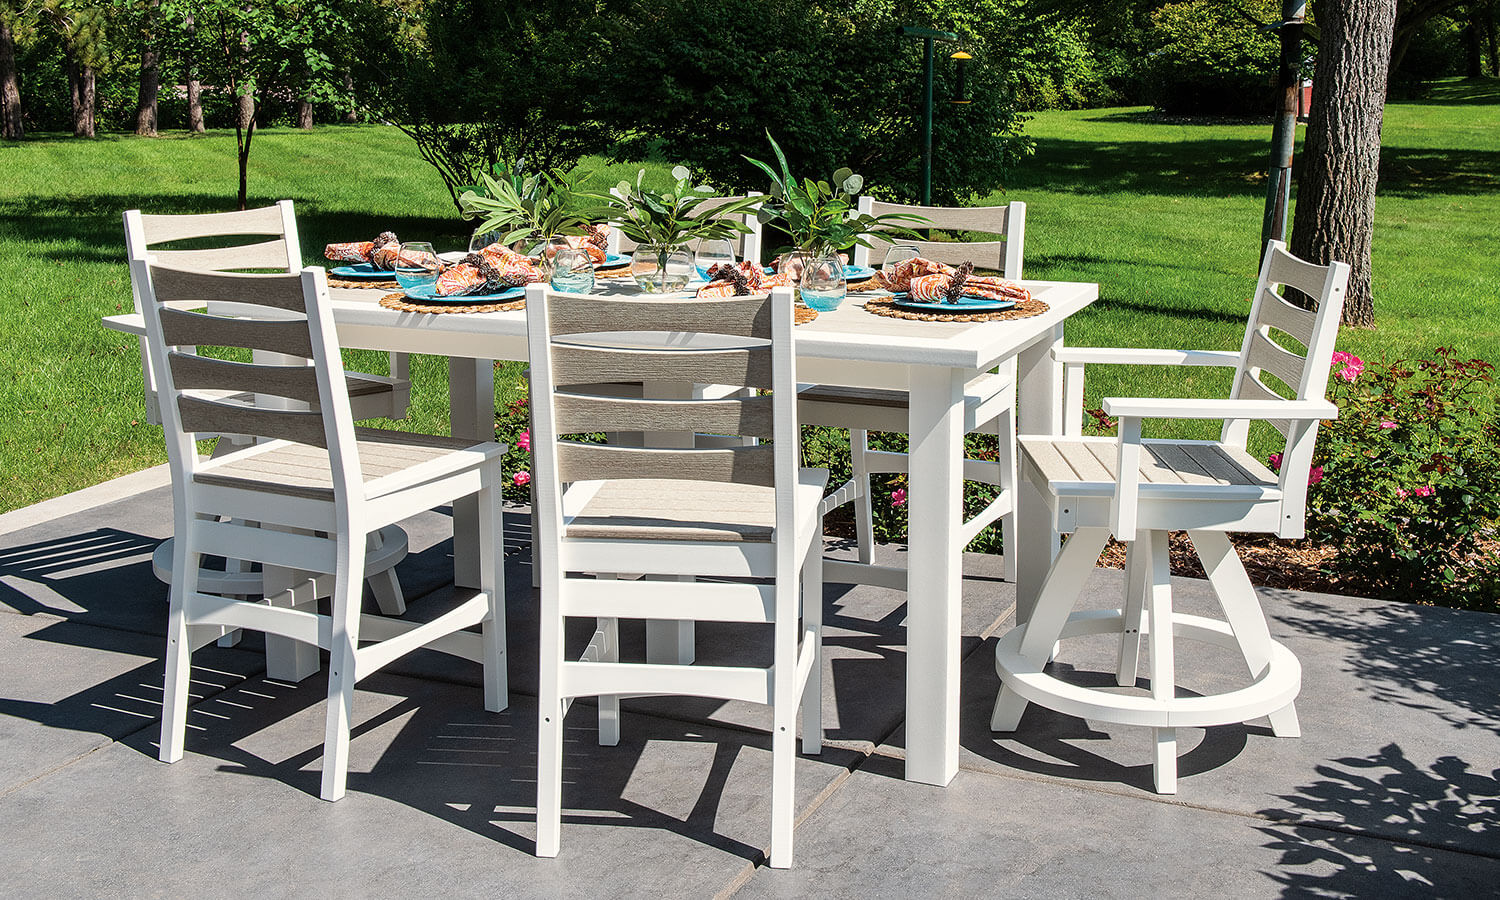 EC Woods Tacoma Outdoor Poly Counter Height Furniture Set Shown in Birch Wood and Bright White